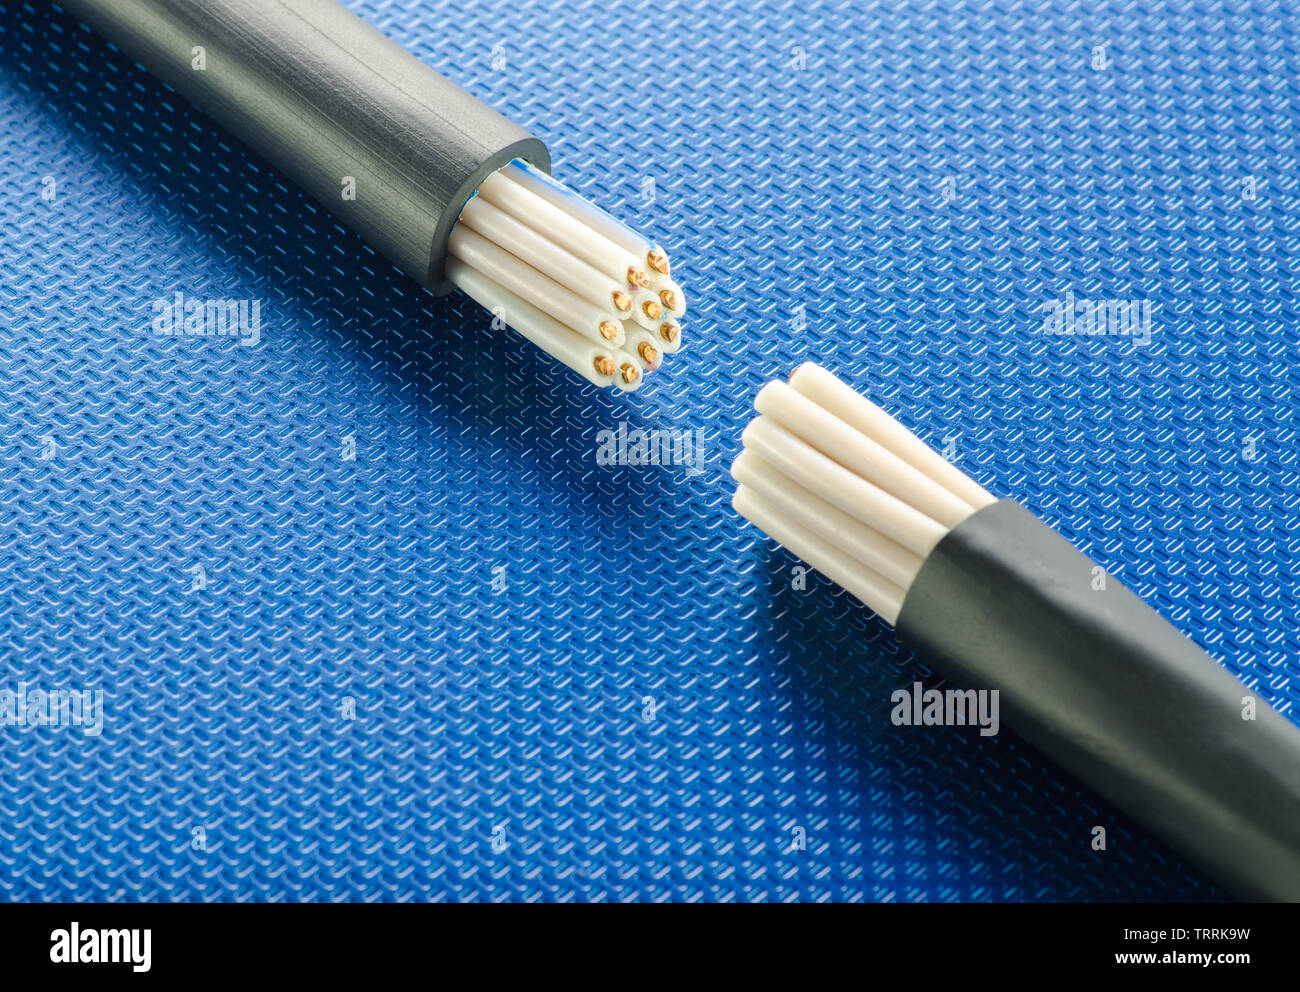 Cross-section of two control cables on blue ribbed technological background Stock Photo